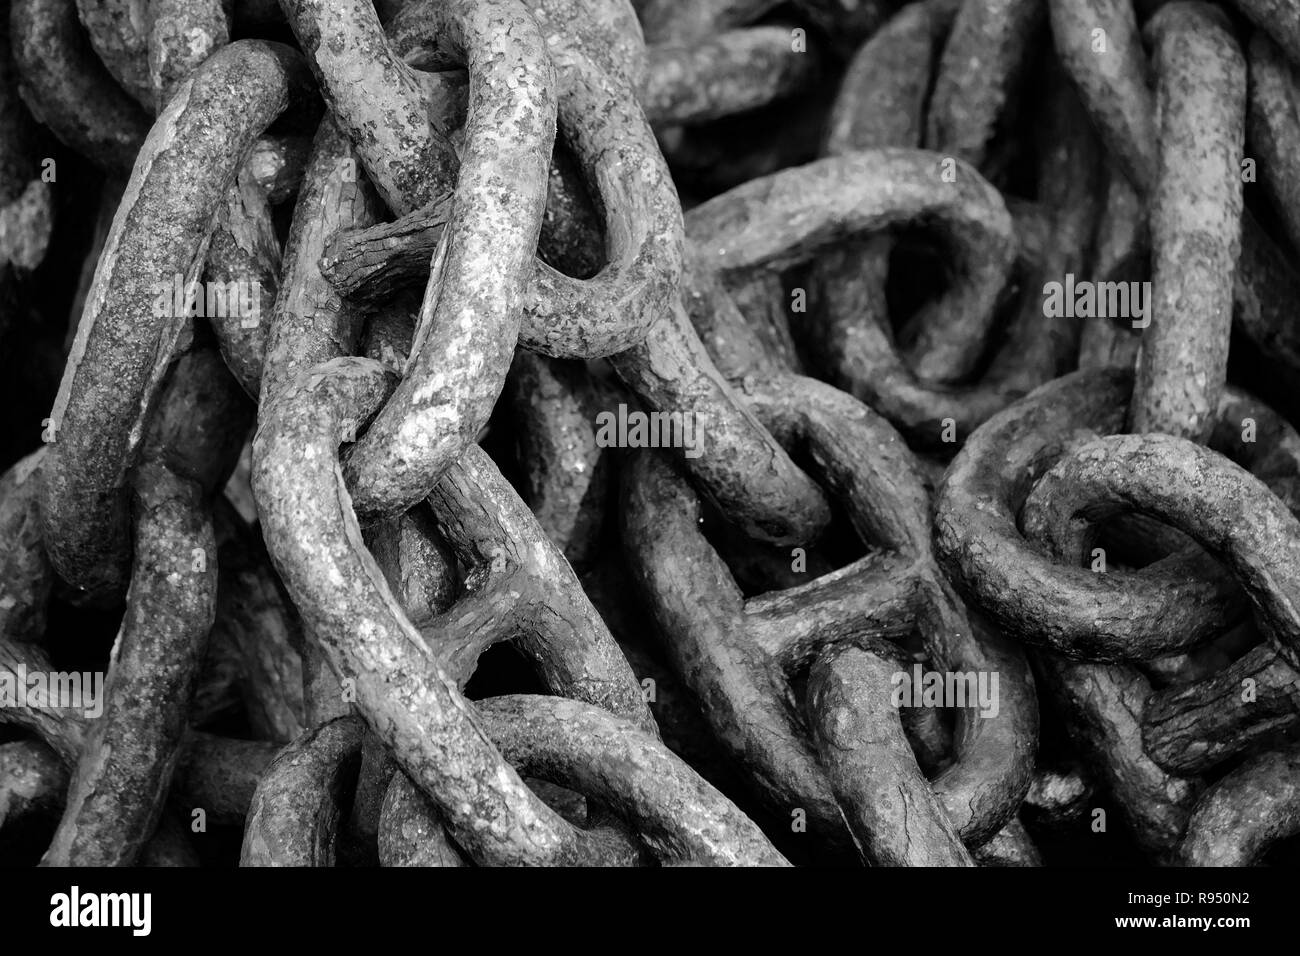 Old rusty anchor chain, black and white, scroll, chain links. Stock Photo